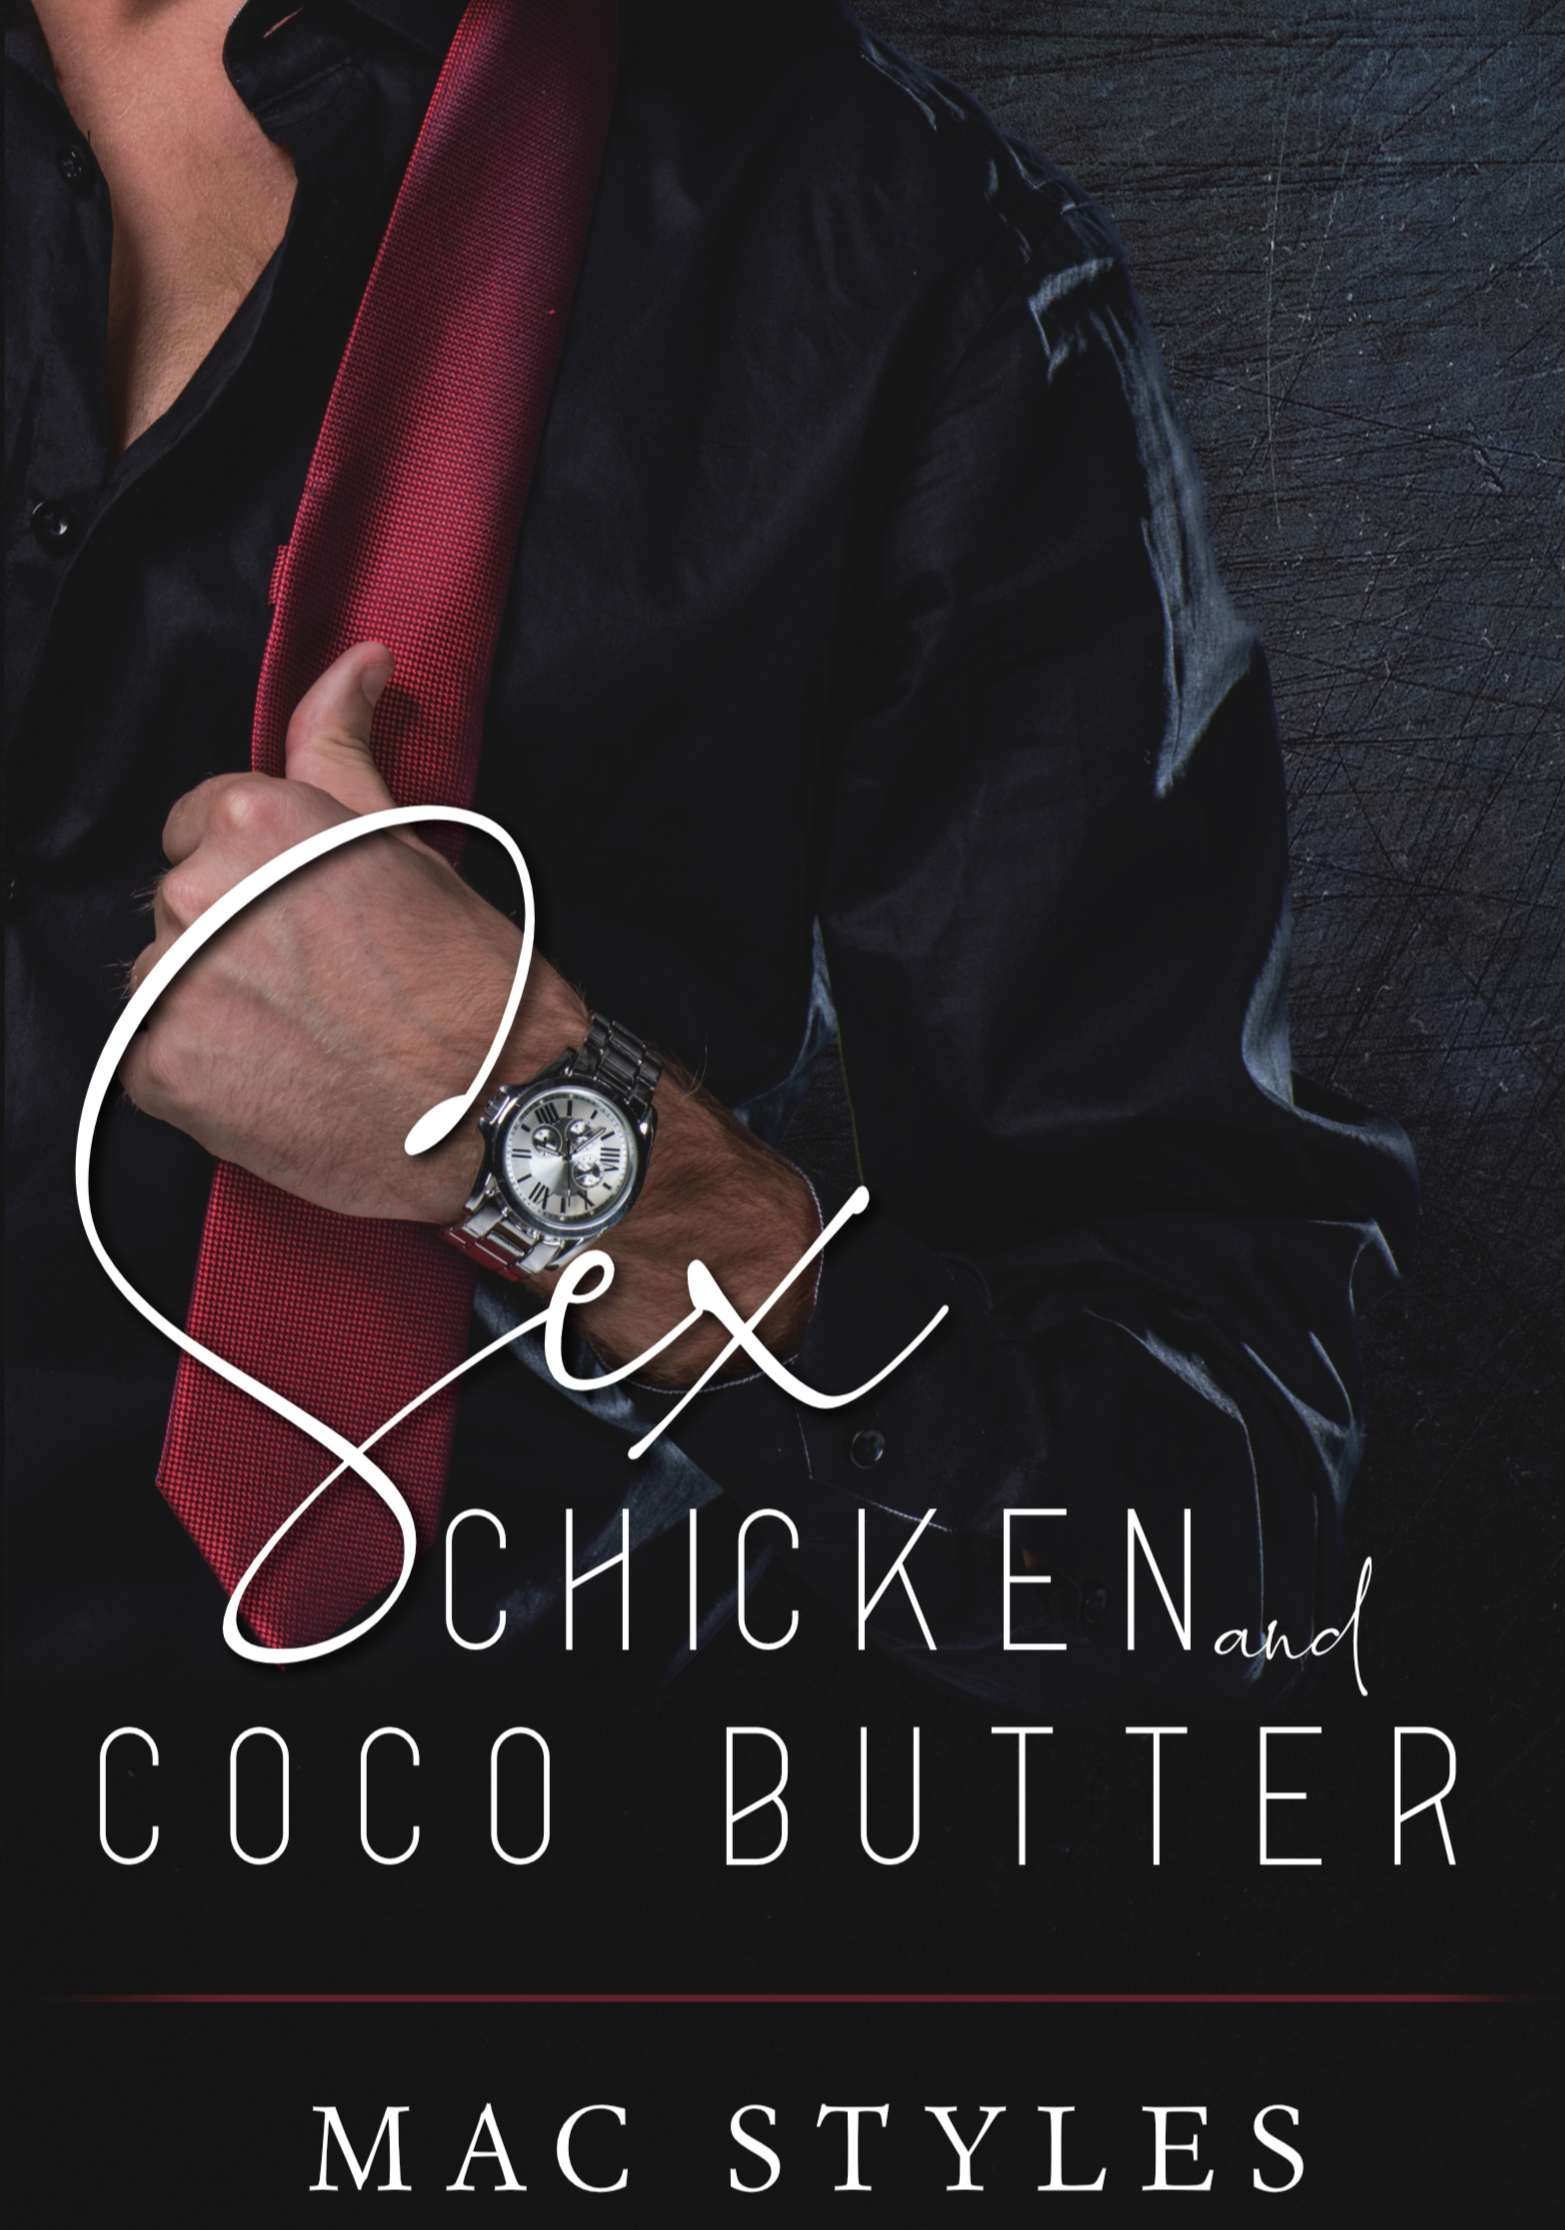 Sex, Chicken and CoCo Butter by Mac Styles